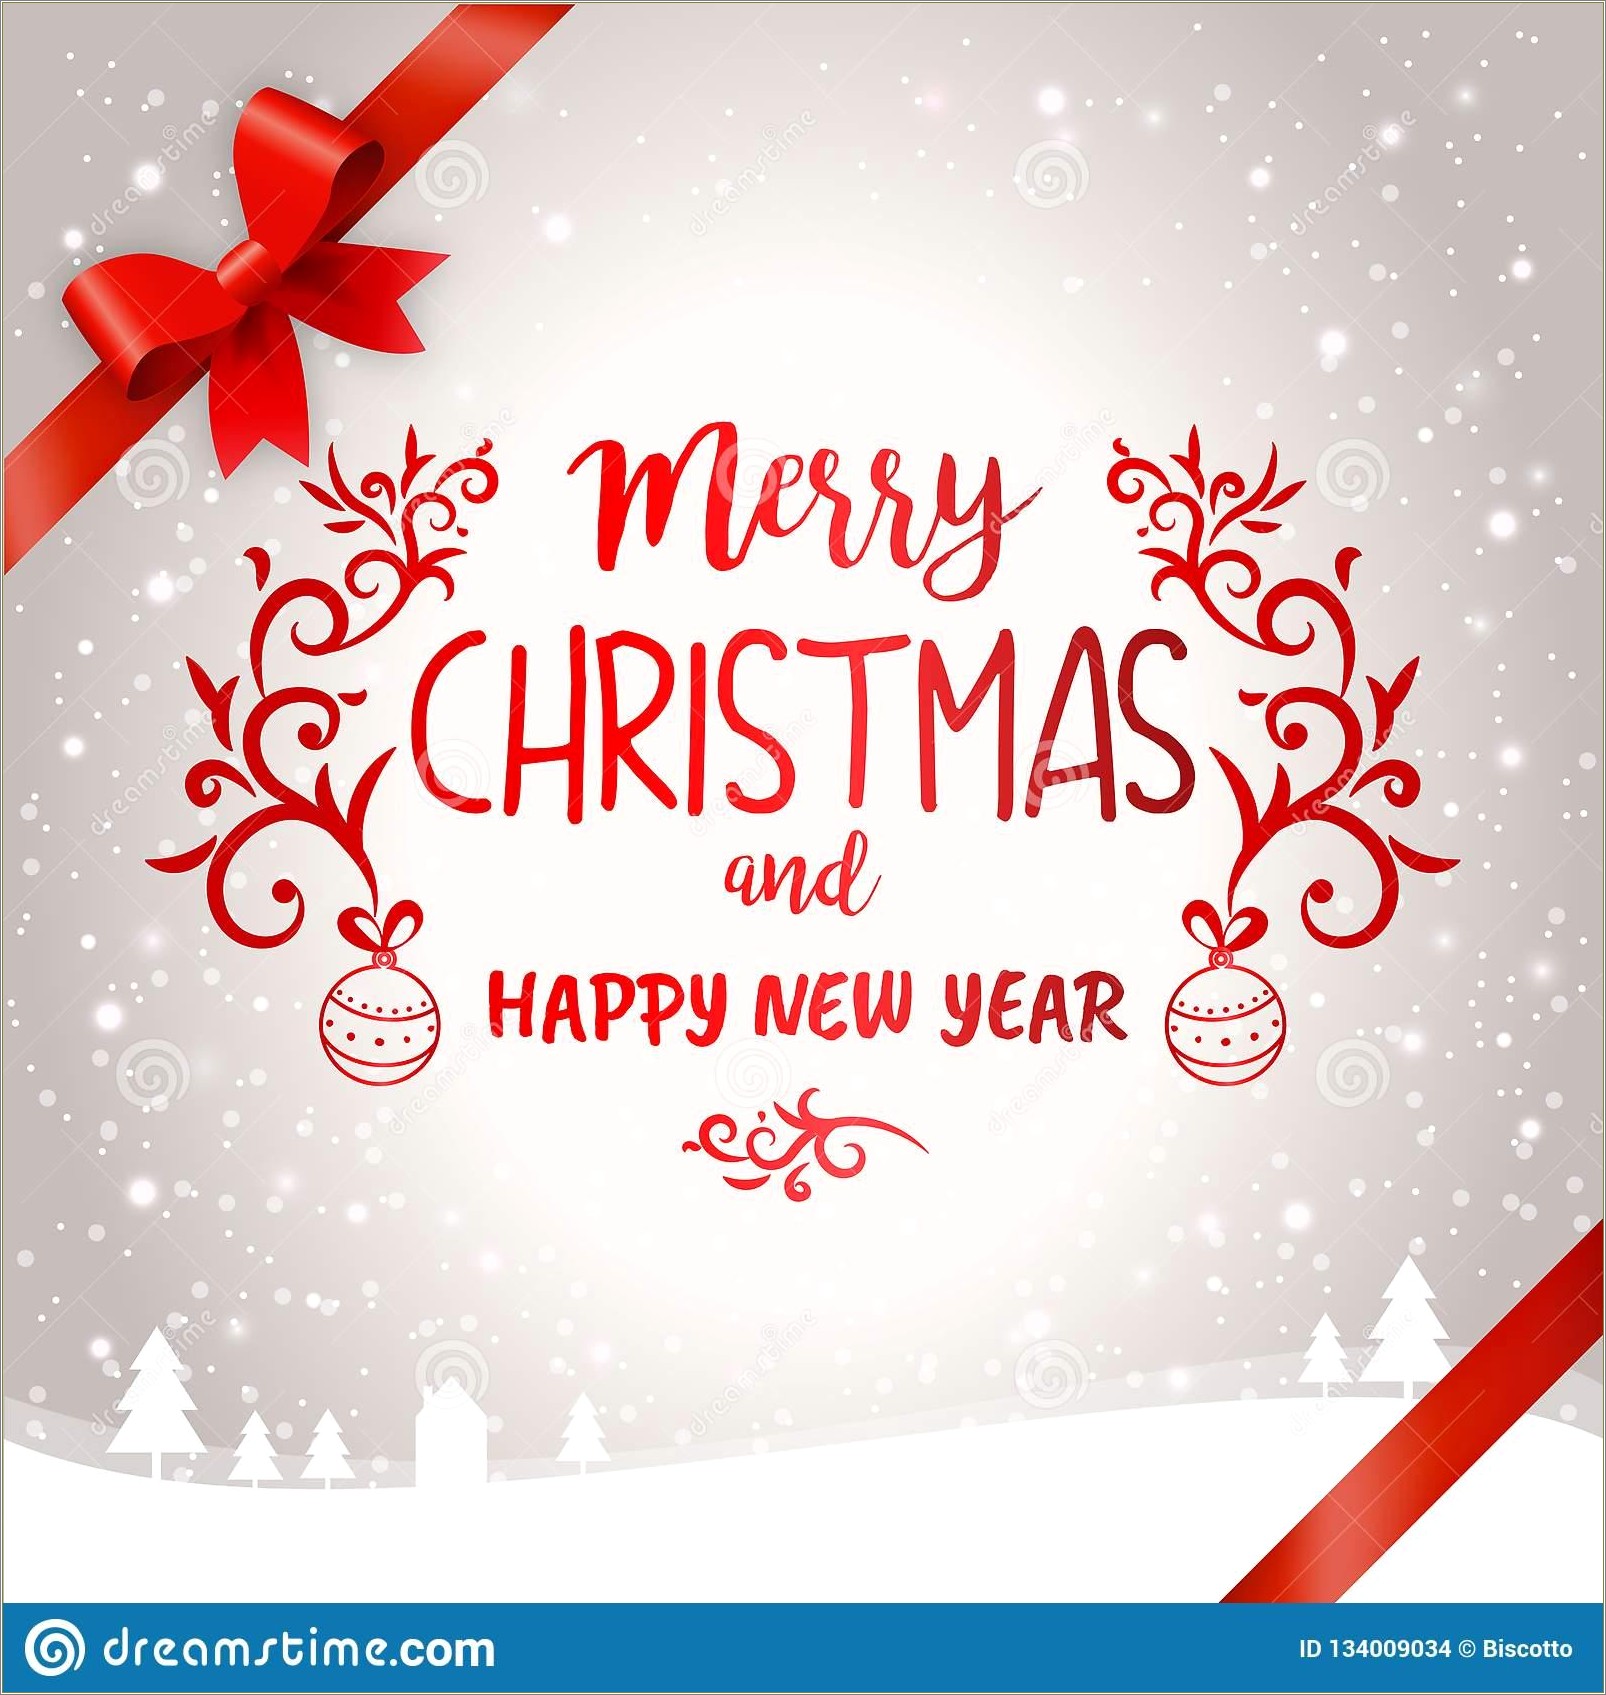 Merry Christmas And Happy New Year Templates Free